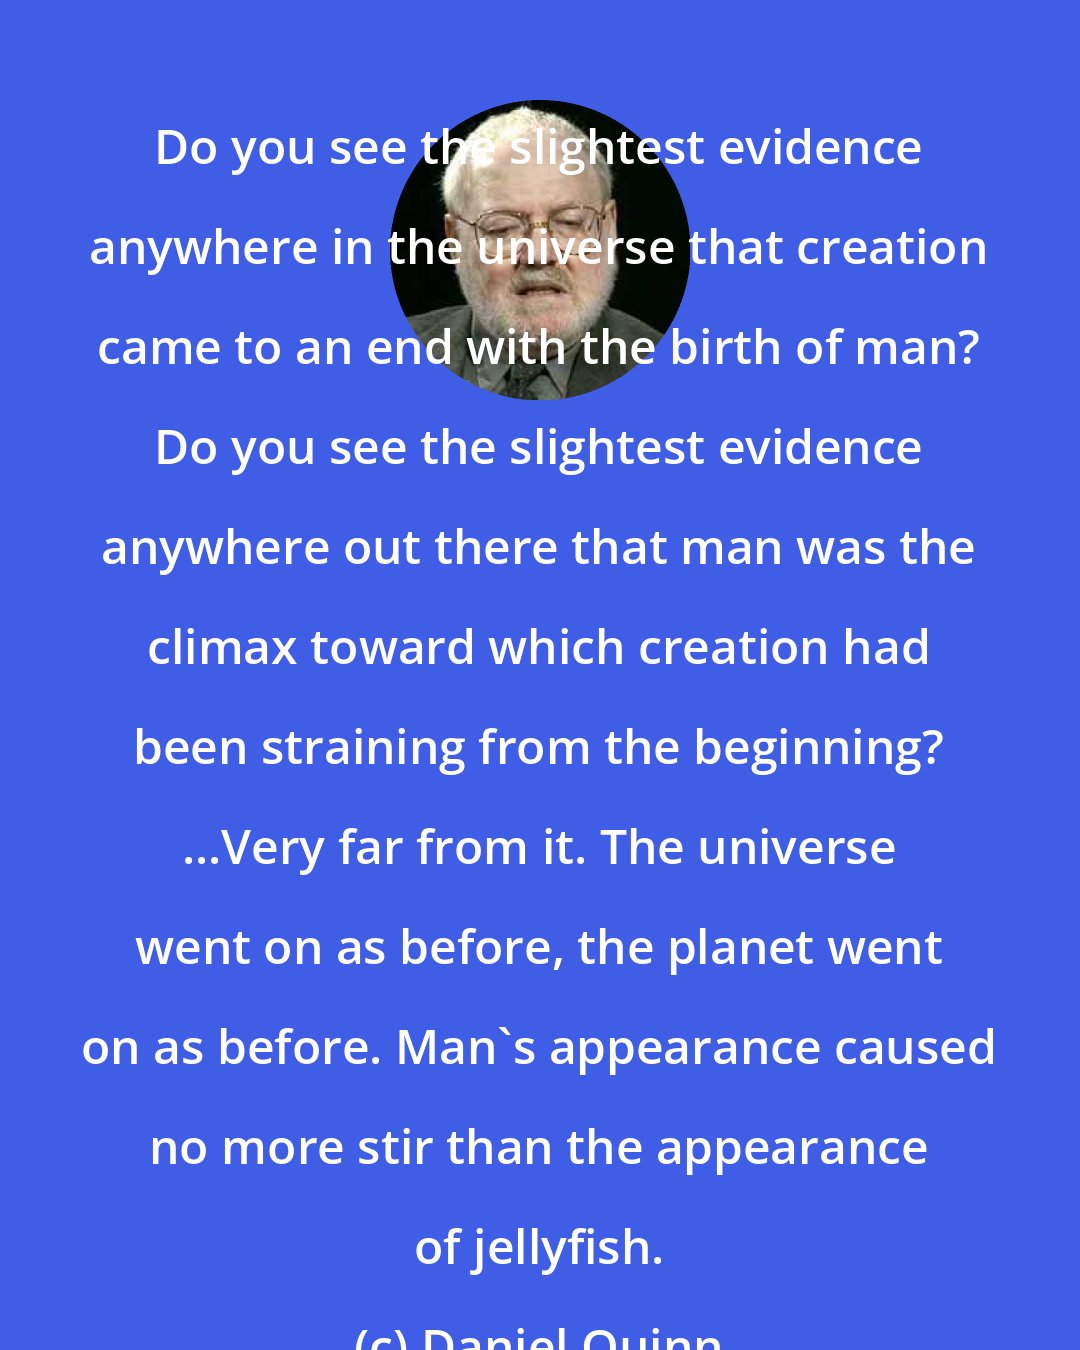 Daniel Quinn: Do you see the slightest evidence anywhere in the universe that creation came to an end with the birth of man? Do you see the slightest evidence anywhere out there that man was the climax toward which creation had been straining from the beginning? ...Very far from it. The universe went on as before, the planet went on as before. Man's appearance caused no more stir than the appearance of jellyfish.